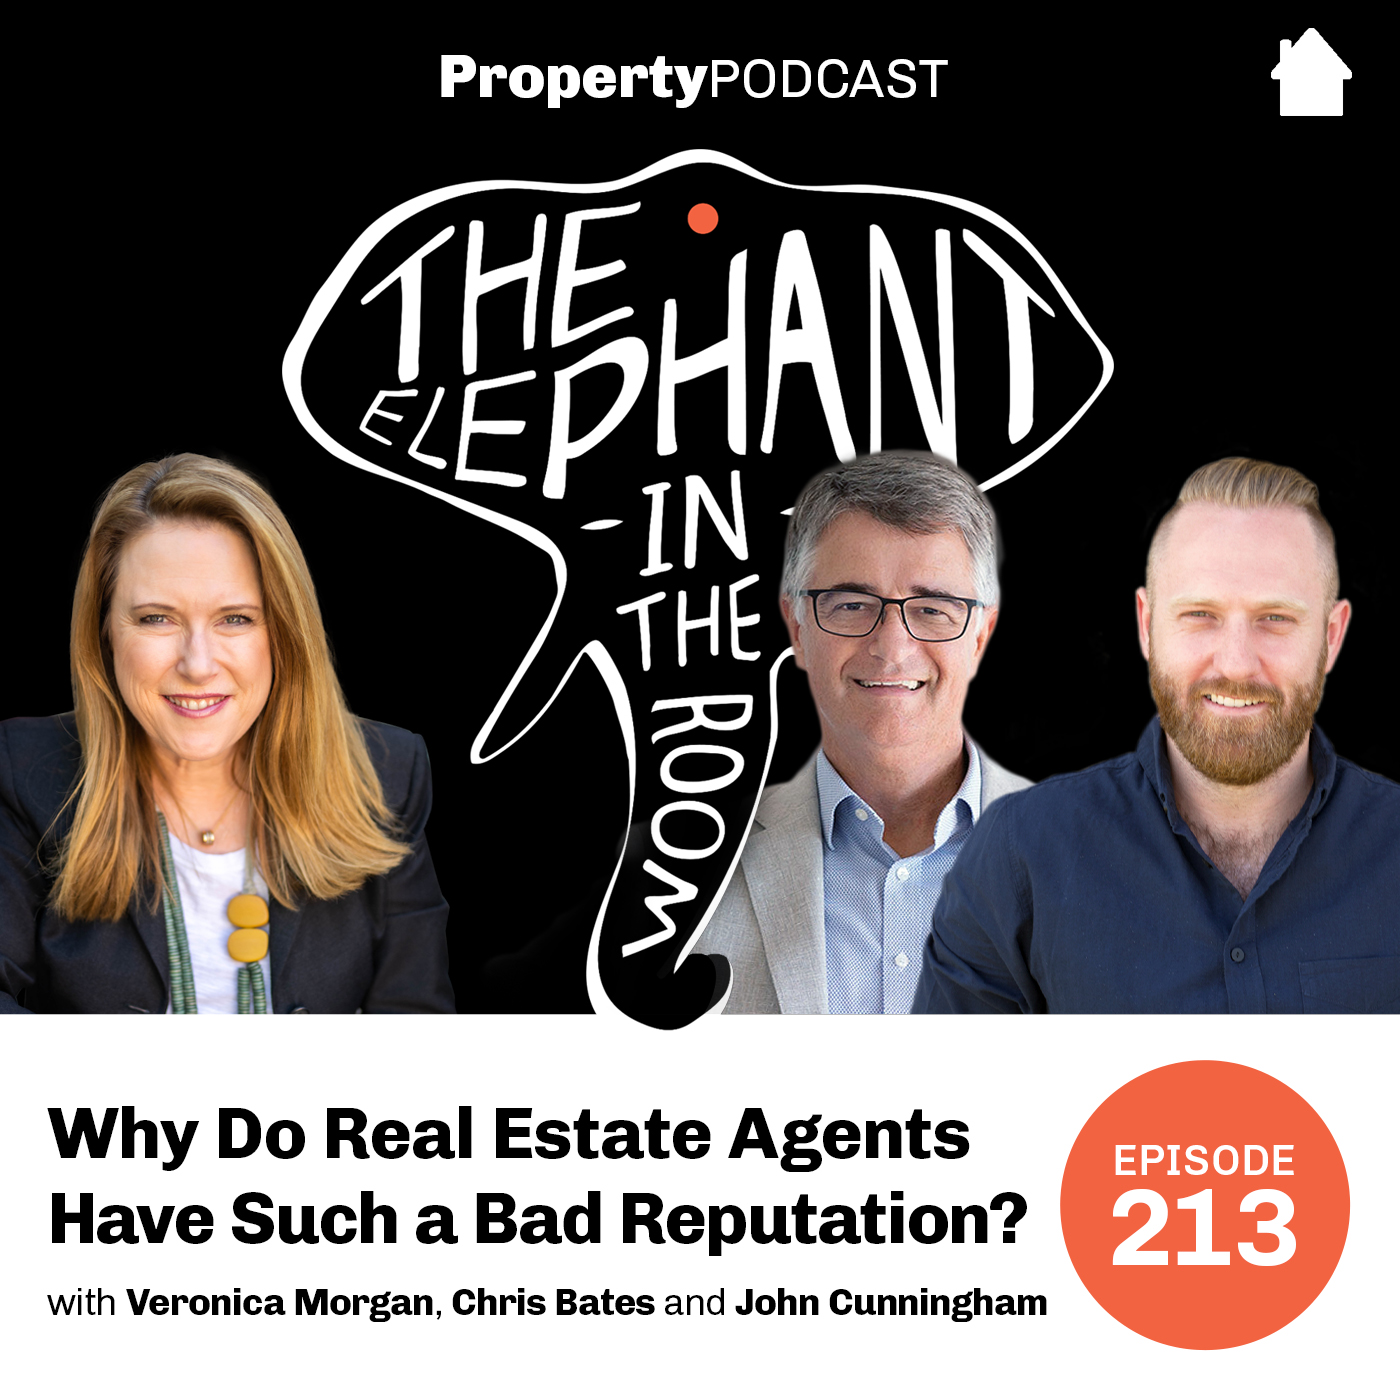 John Cunningham | Why Do Real Estate Agents Have Such a Bad Reputation?